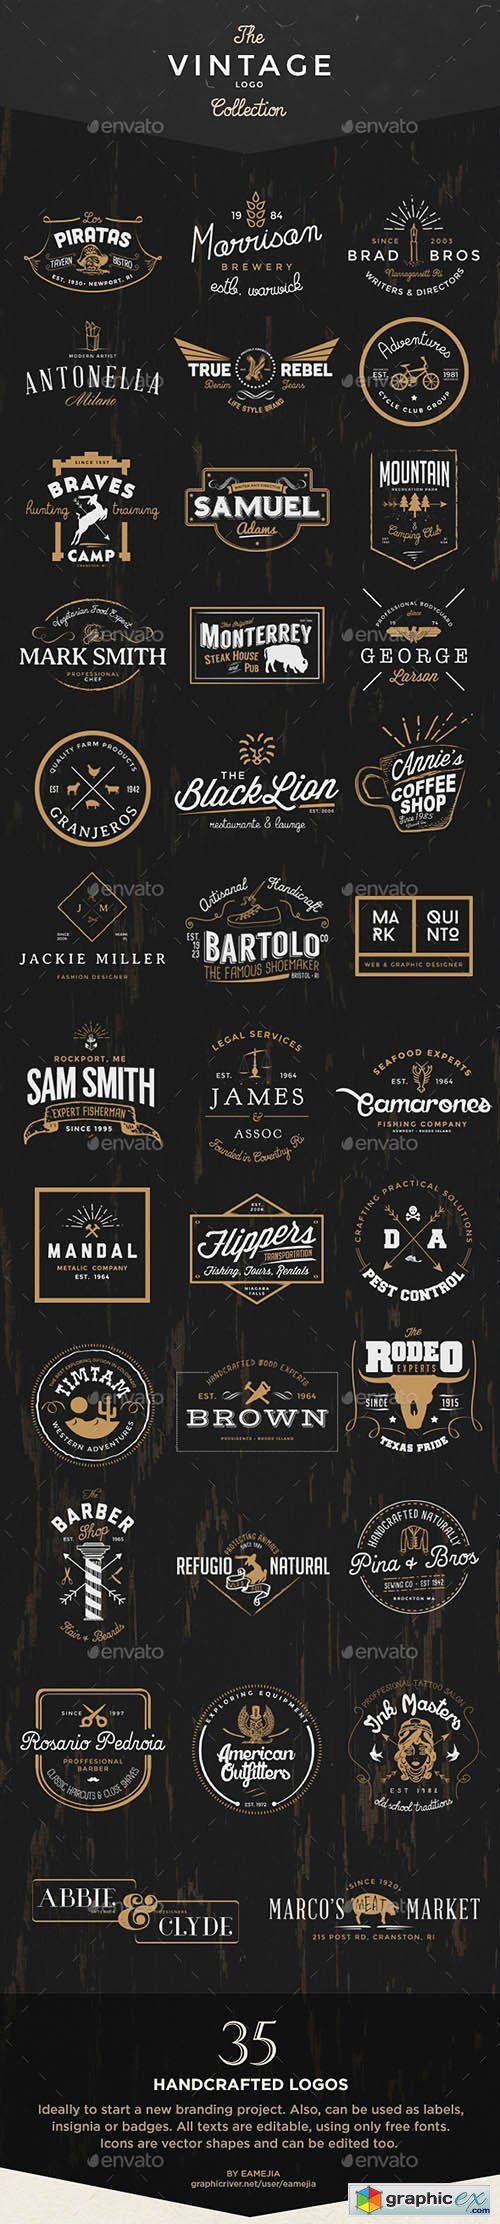 The Vintage Logo & Badge Collection